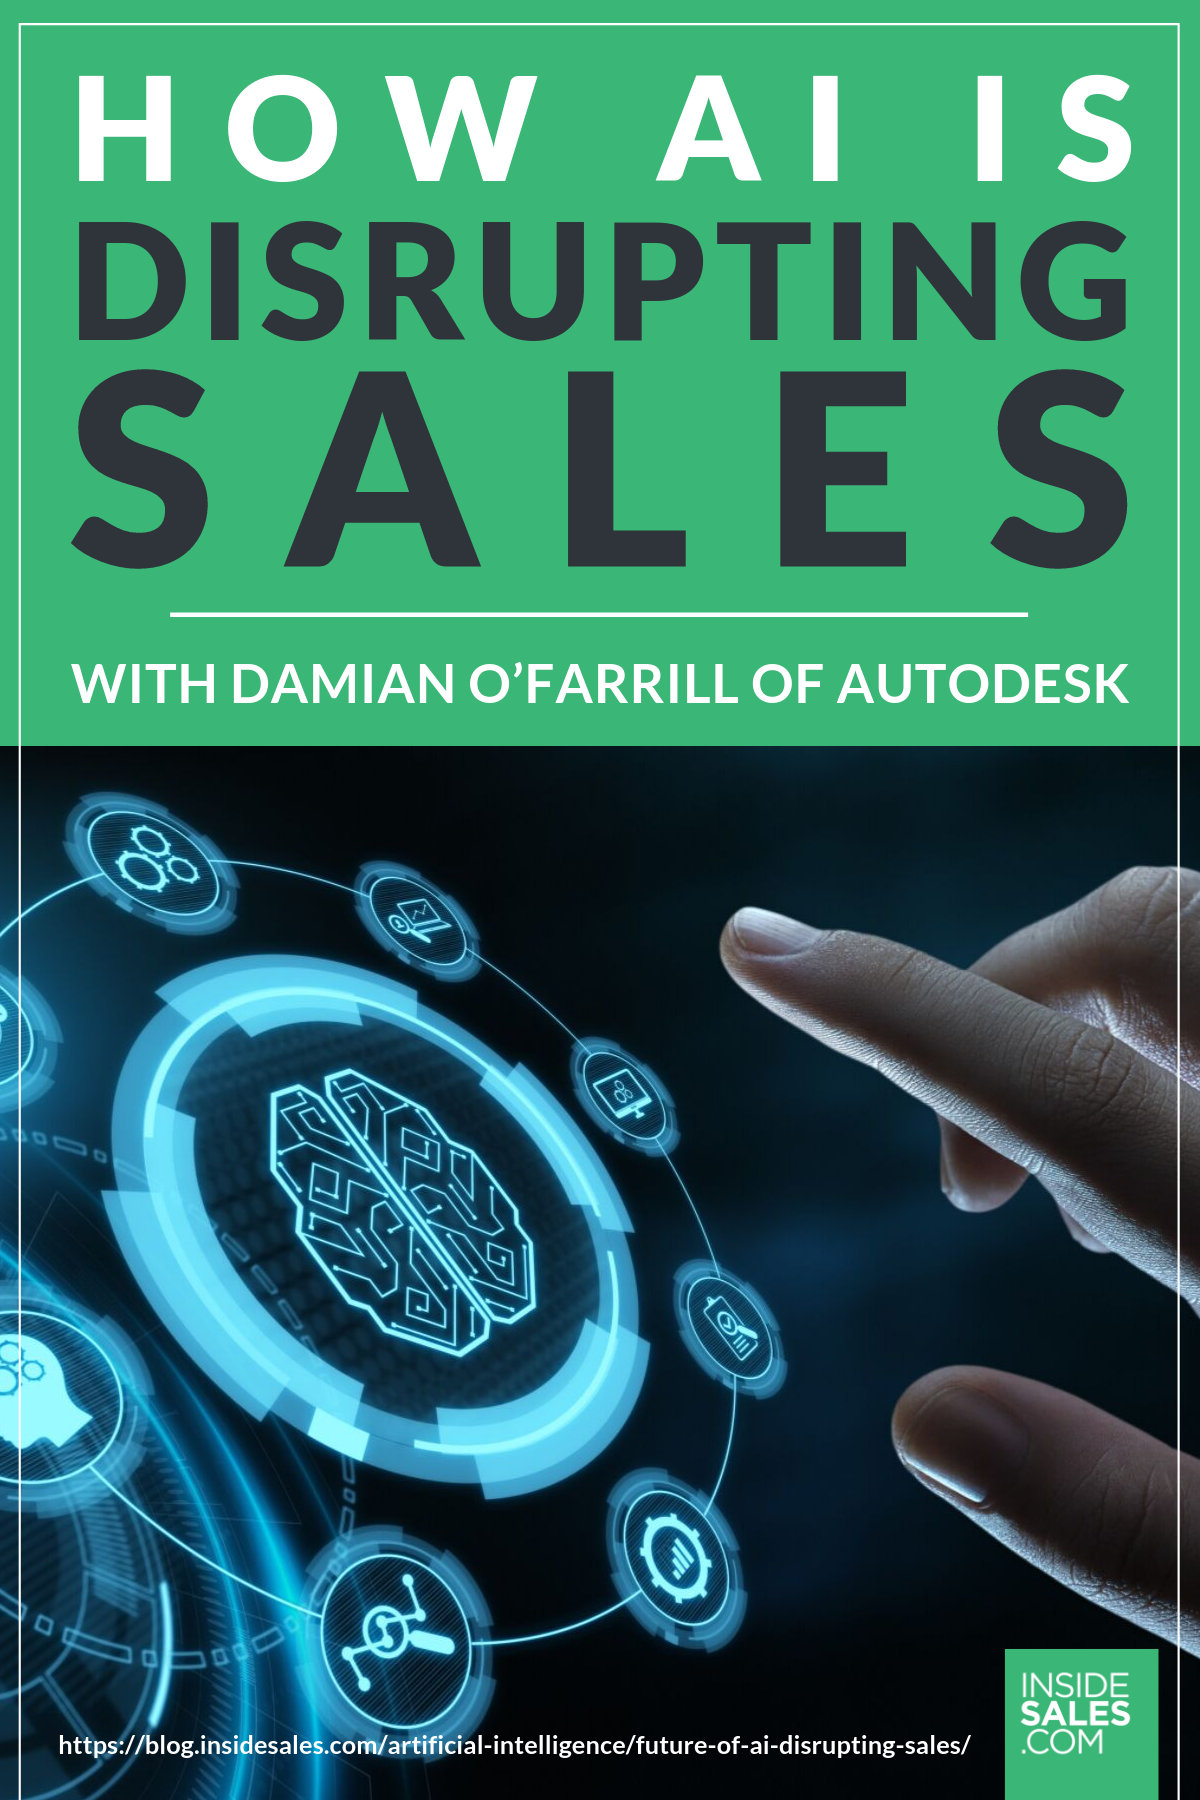 How AI Is Disrupting Sales w/Damian O’Farrill @Autodesk https://www.insidesales.com/blog/artificial-intelligence/future-of-ai-disrupting-sales/